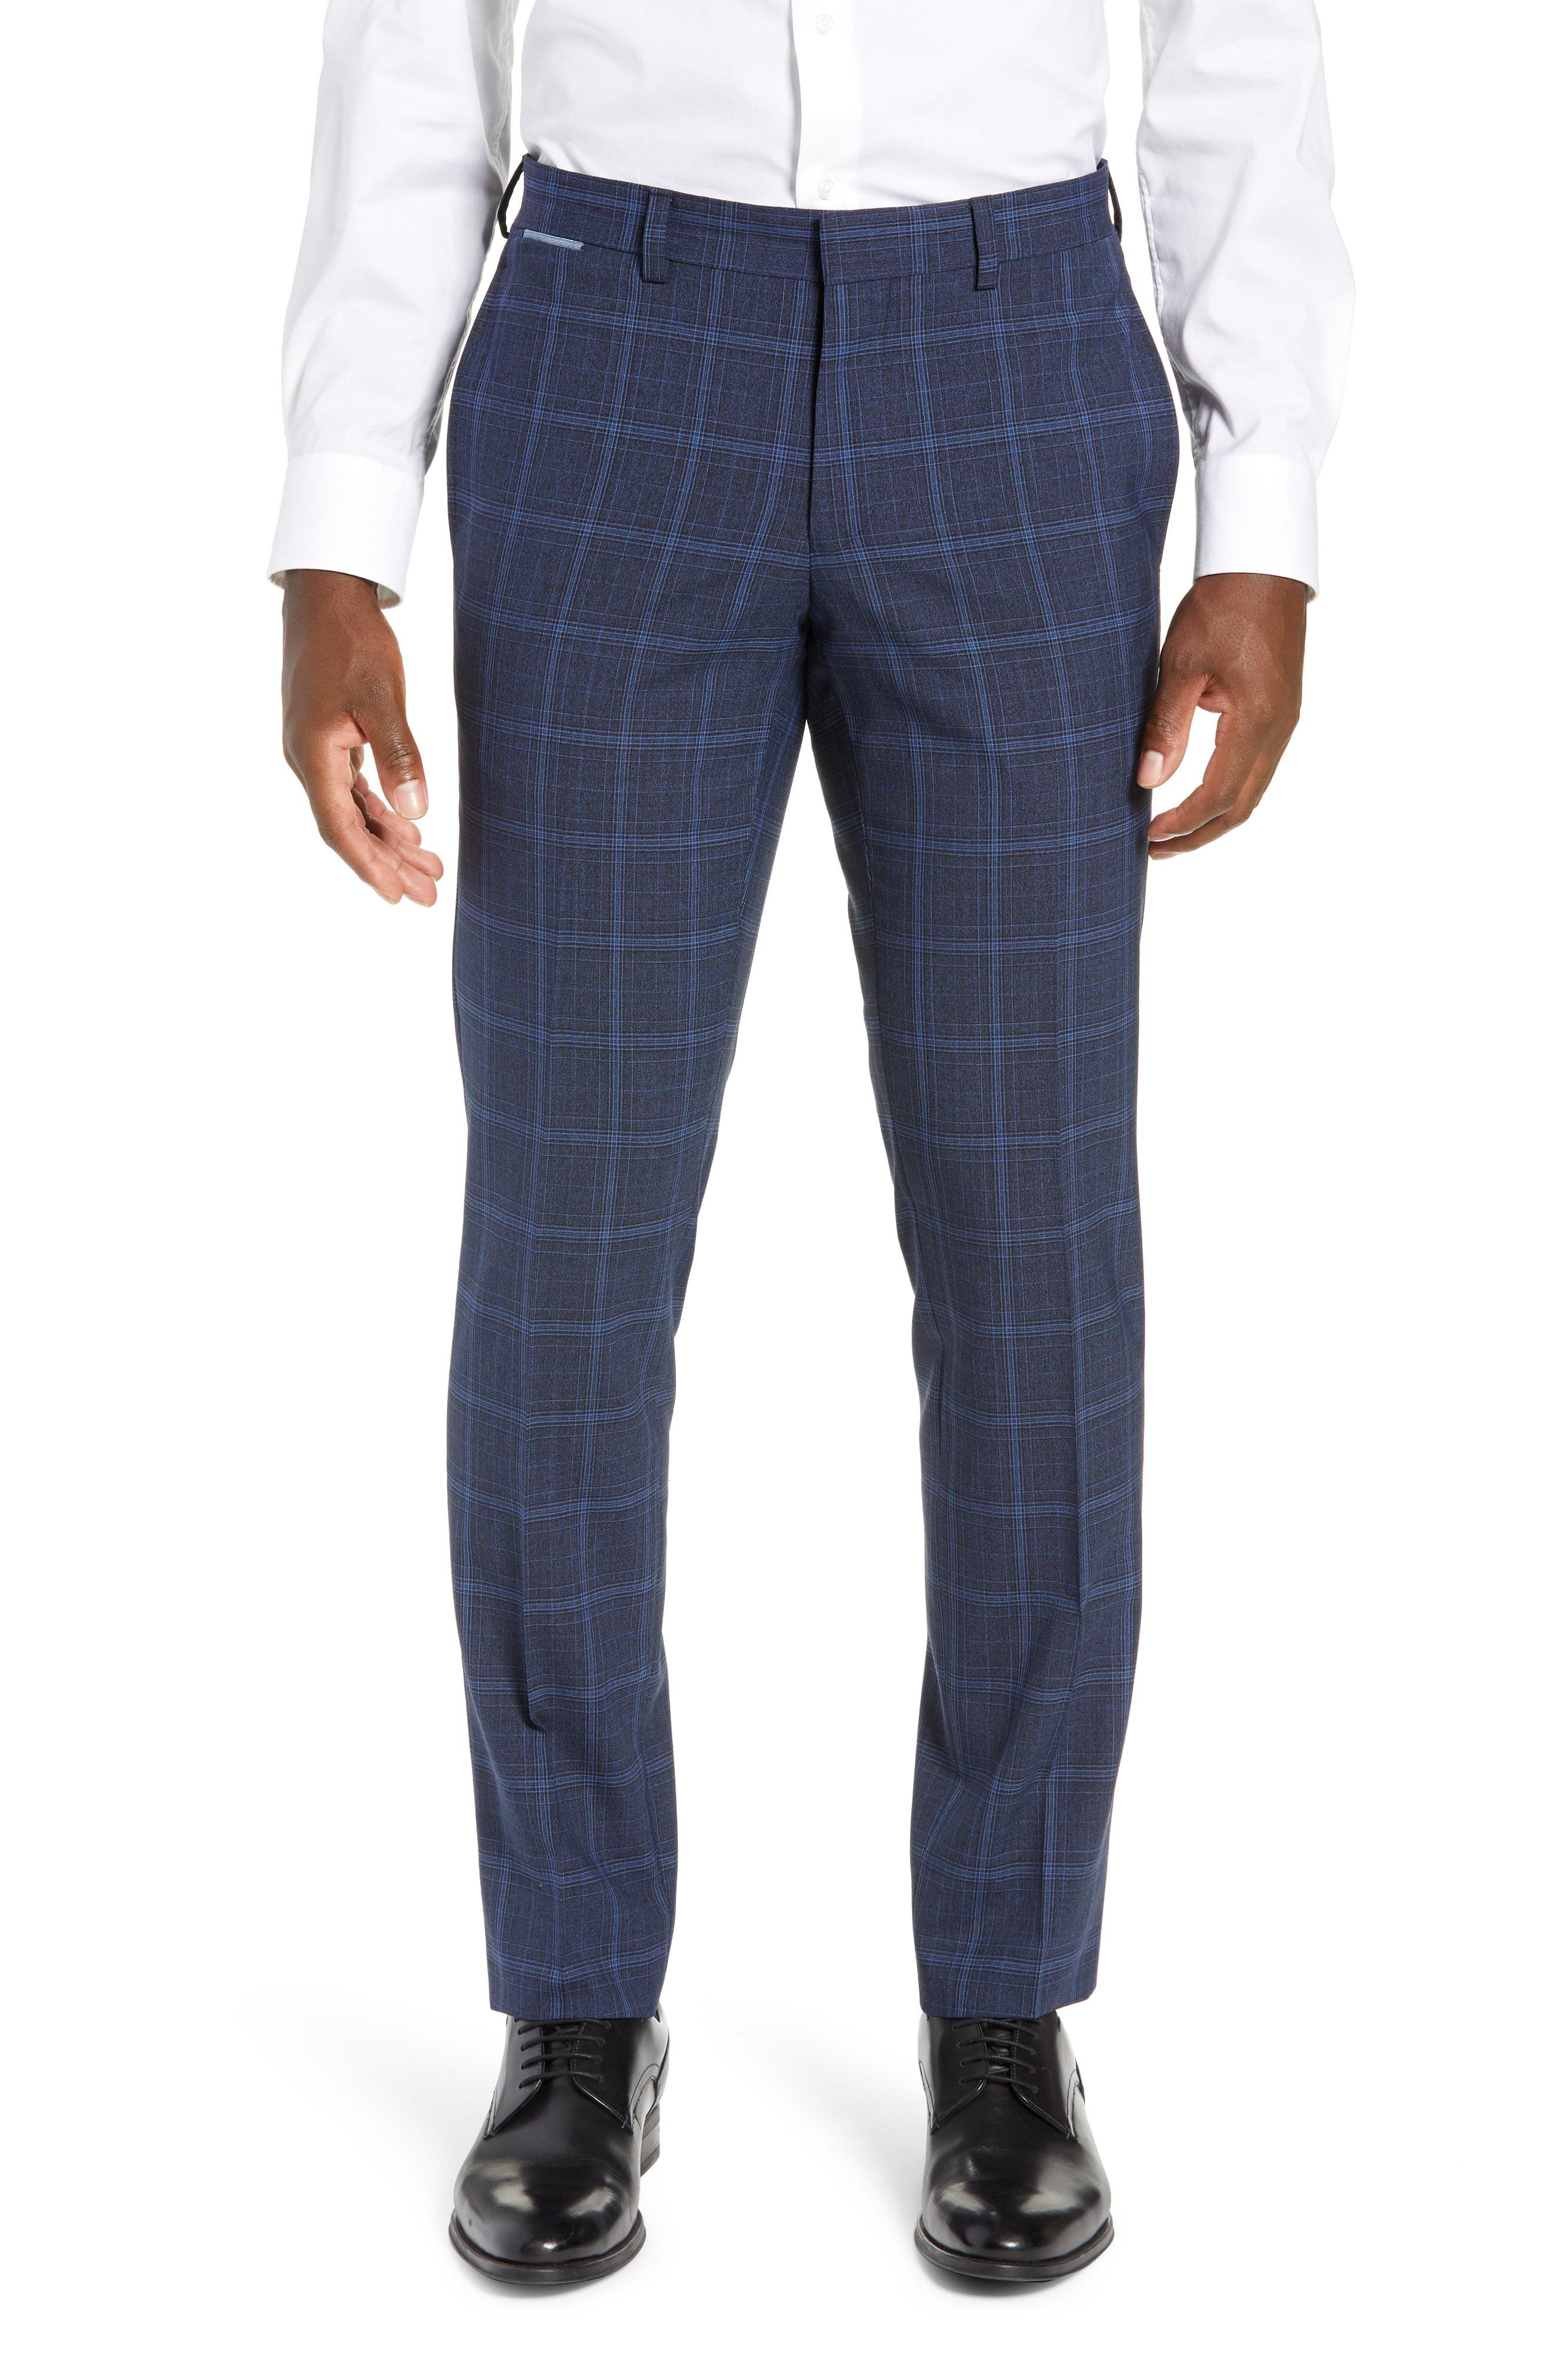 Lyst - Ted Baker Reese Flat Front Plaid Wool Trousers in Blue for Men